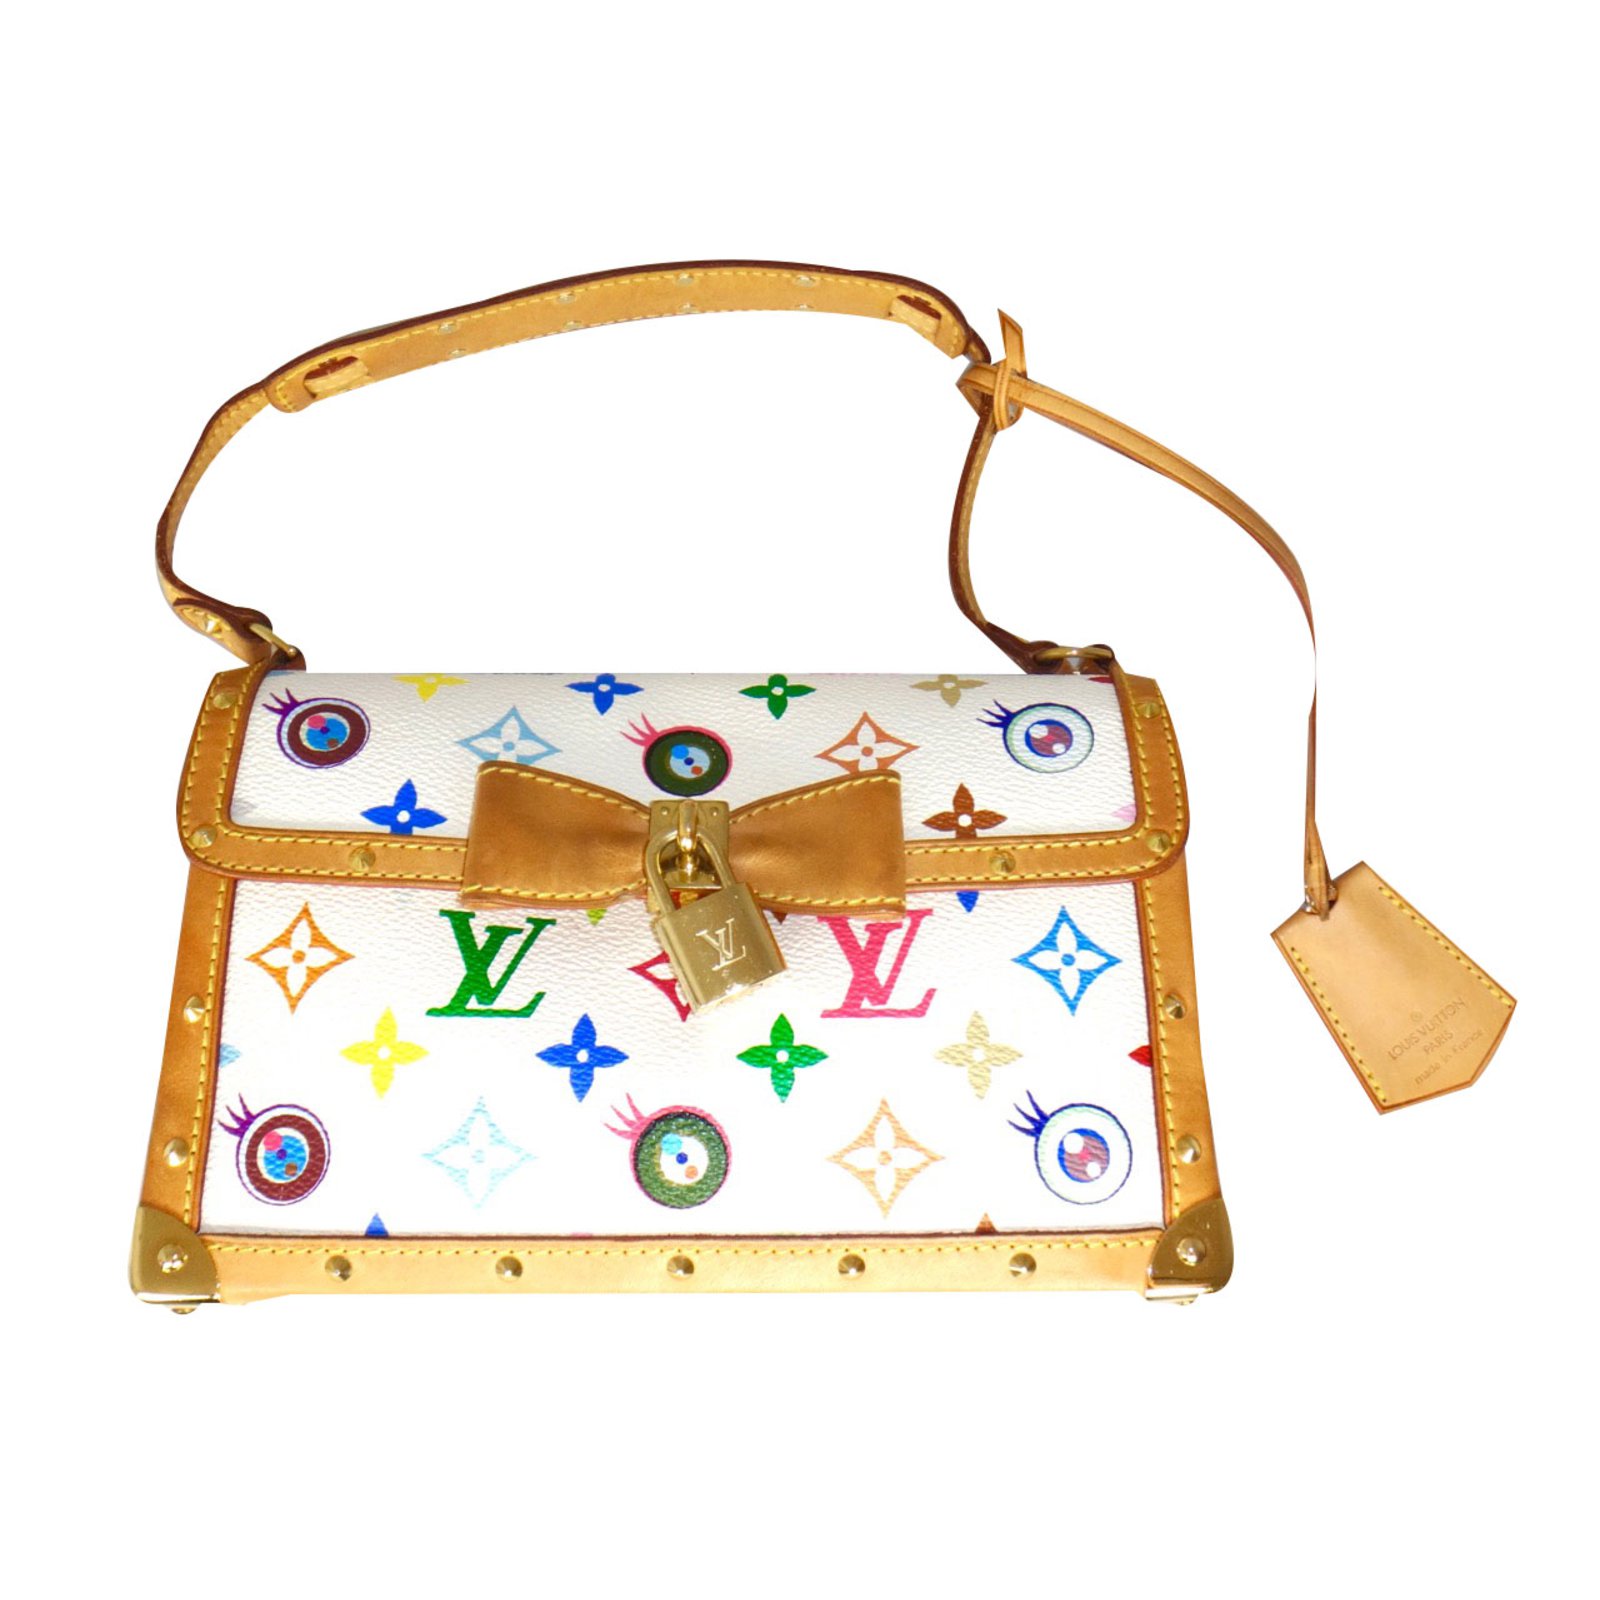 Louis Vuitton “EYE NEED YOU” Limited Edition Monogram BAG Multiple